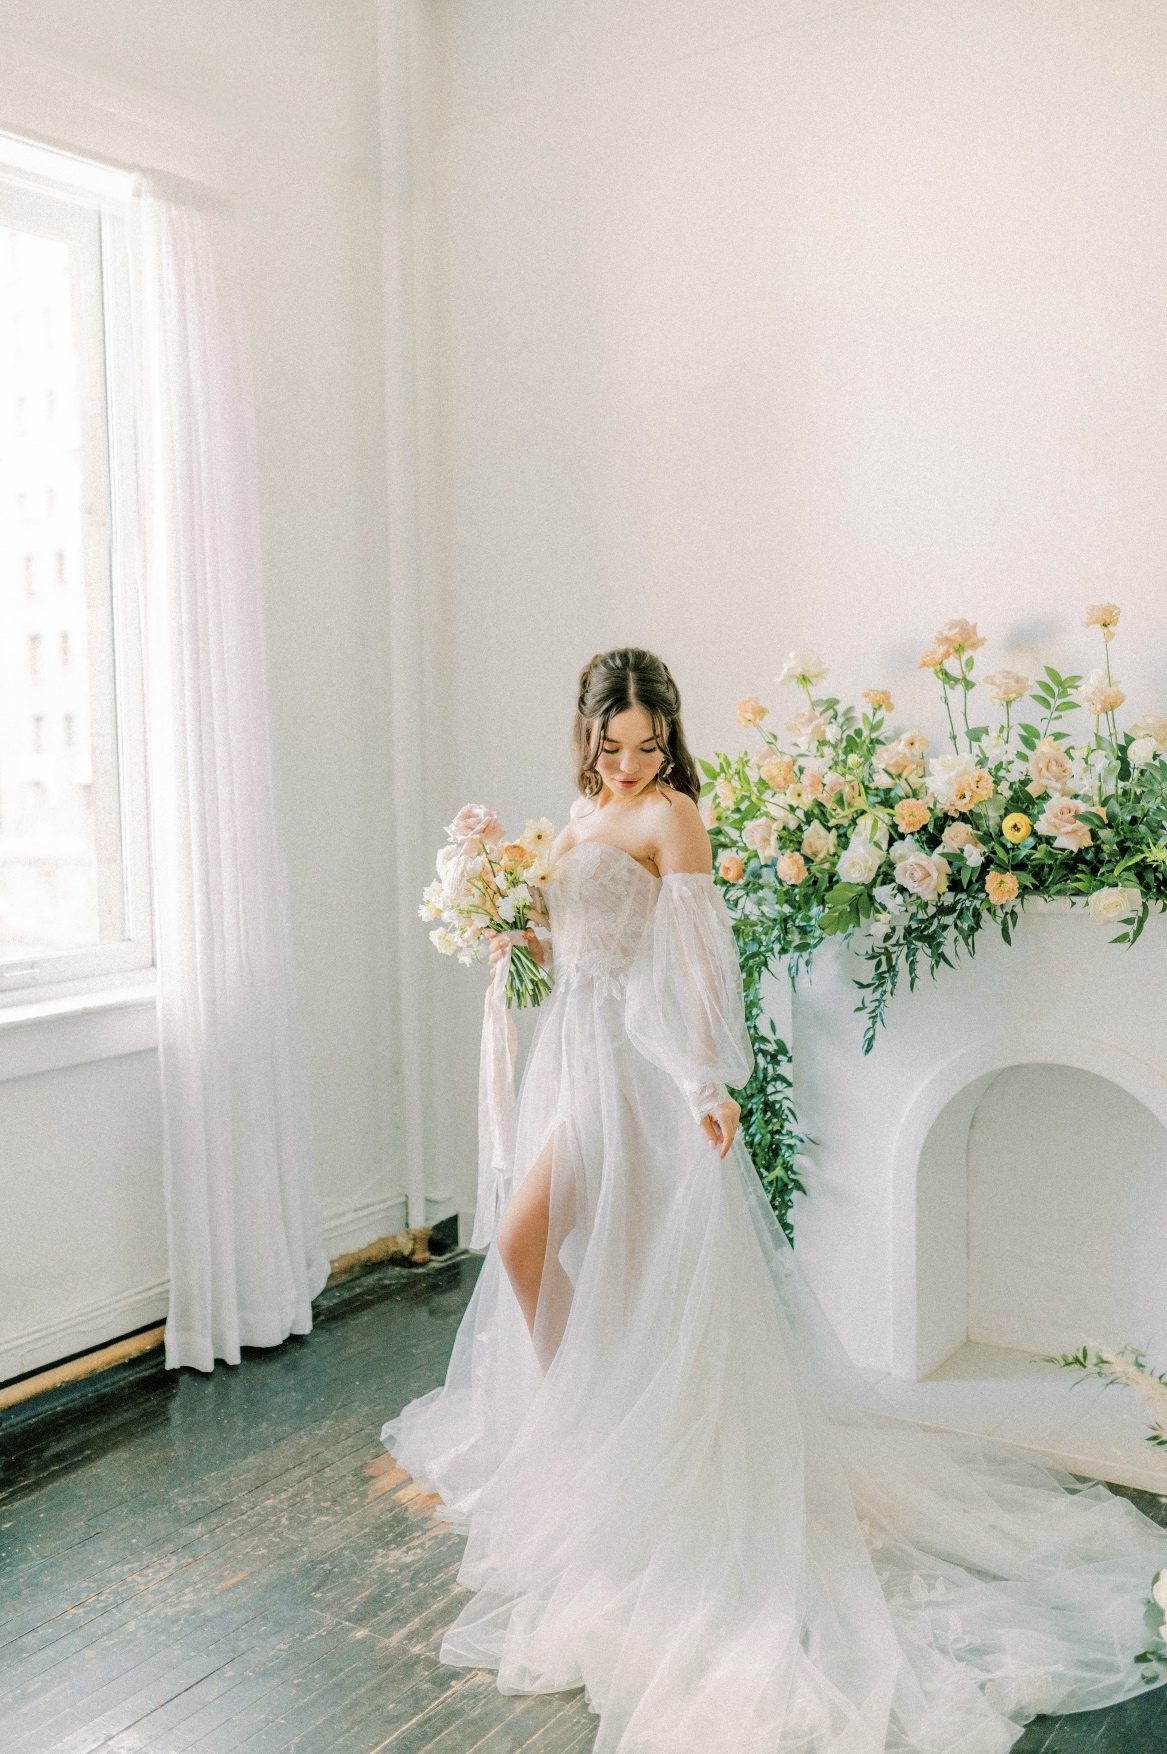 Our model stands in front of the beautiful mantel arrangement, holding her peach and blush bouquet looking down at the draping fabric of her bridal gown